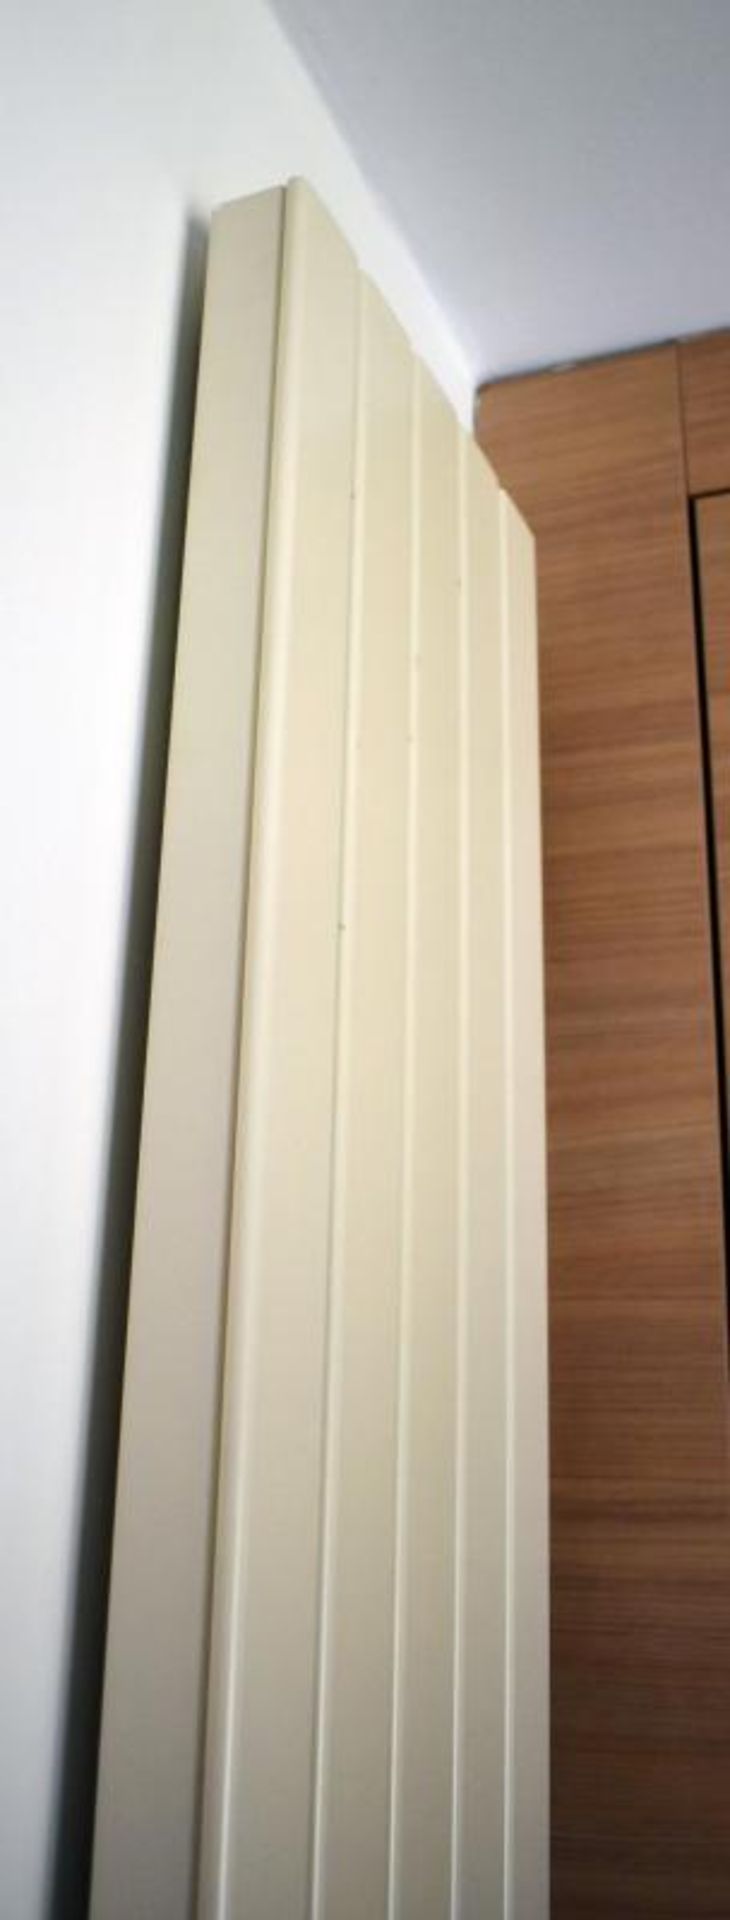 1 x Jaga Vertical Wall Panel Radiator With Vale - Cream Finish Suitable For All Interiors - H200 x W - Image 4 of 5